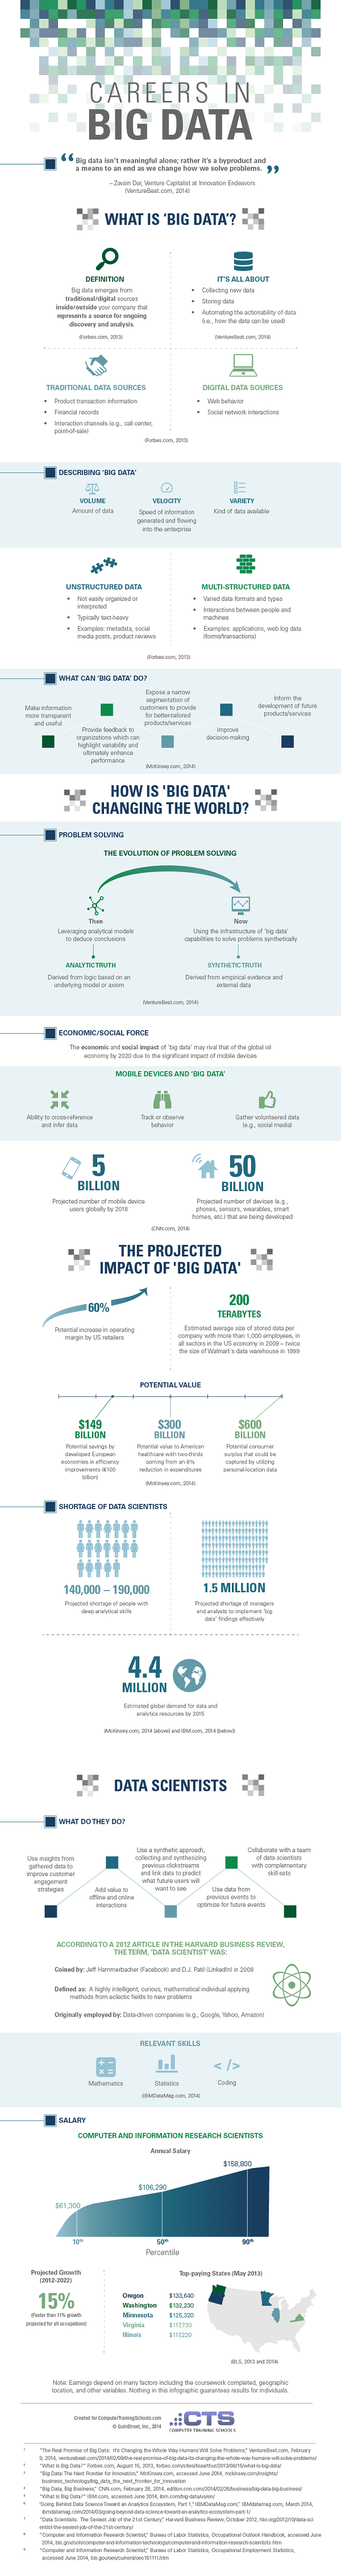 Careers in Big Data infographic